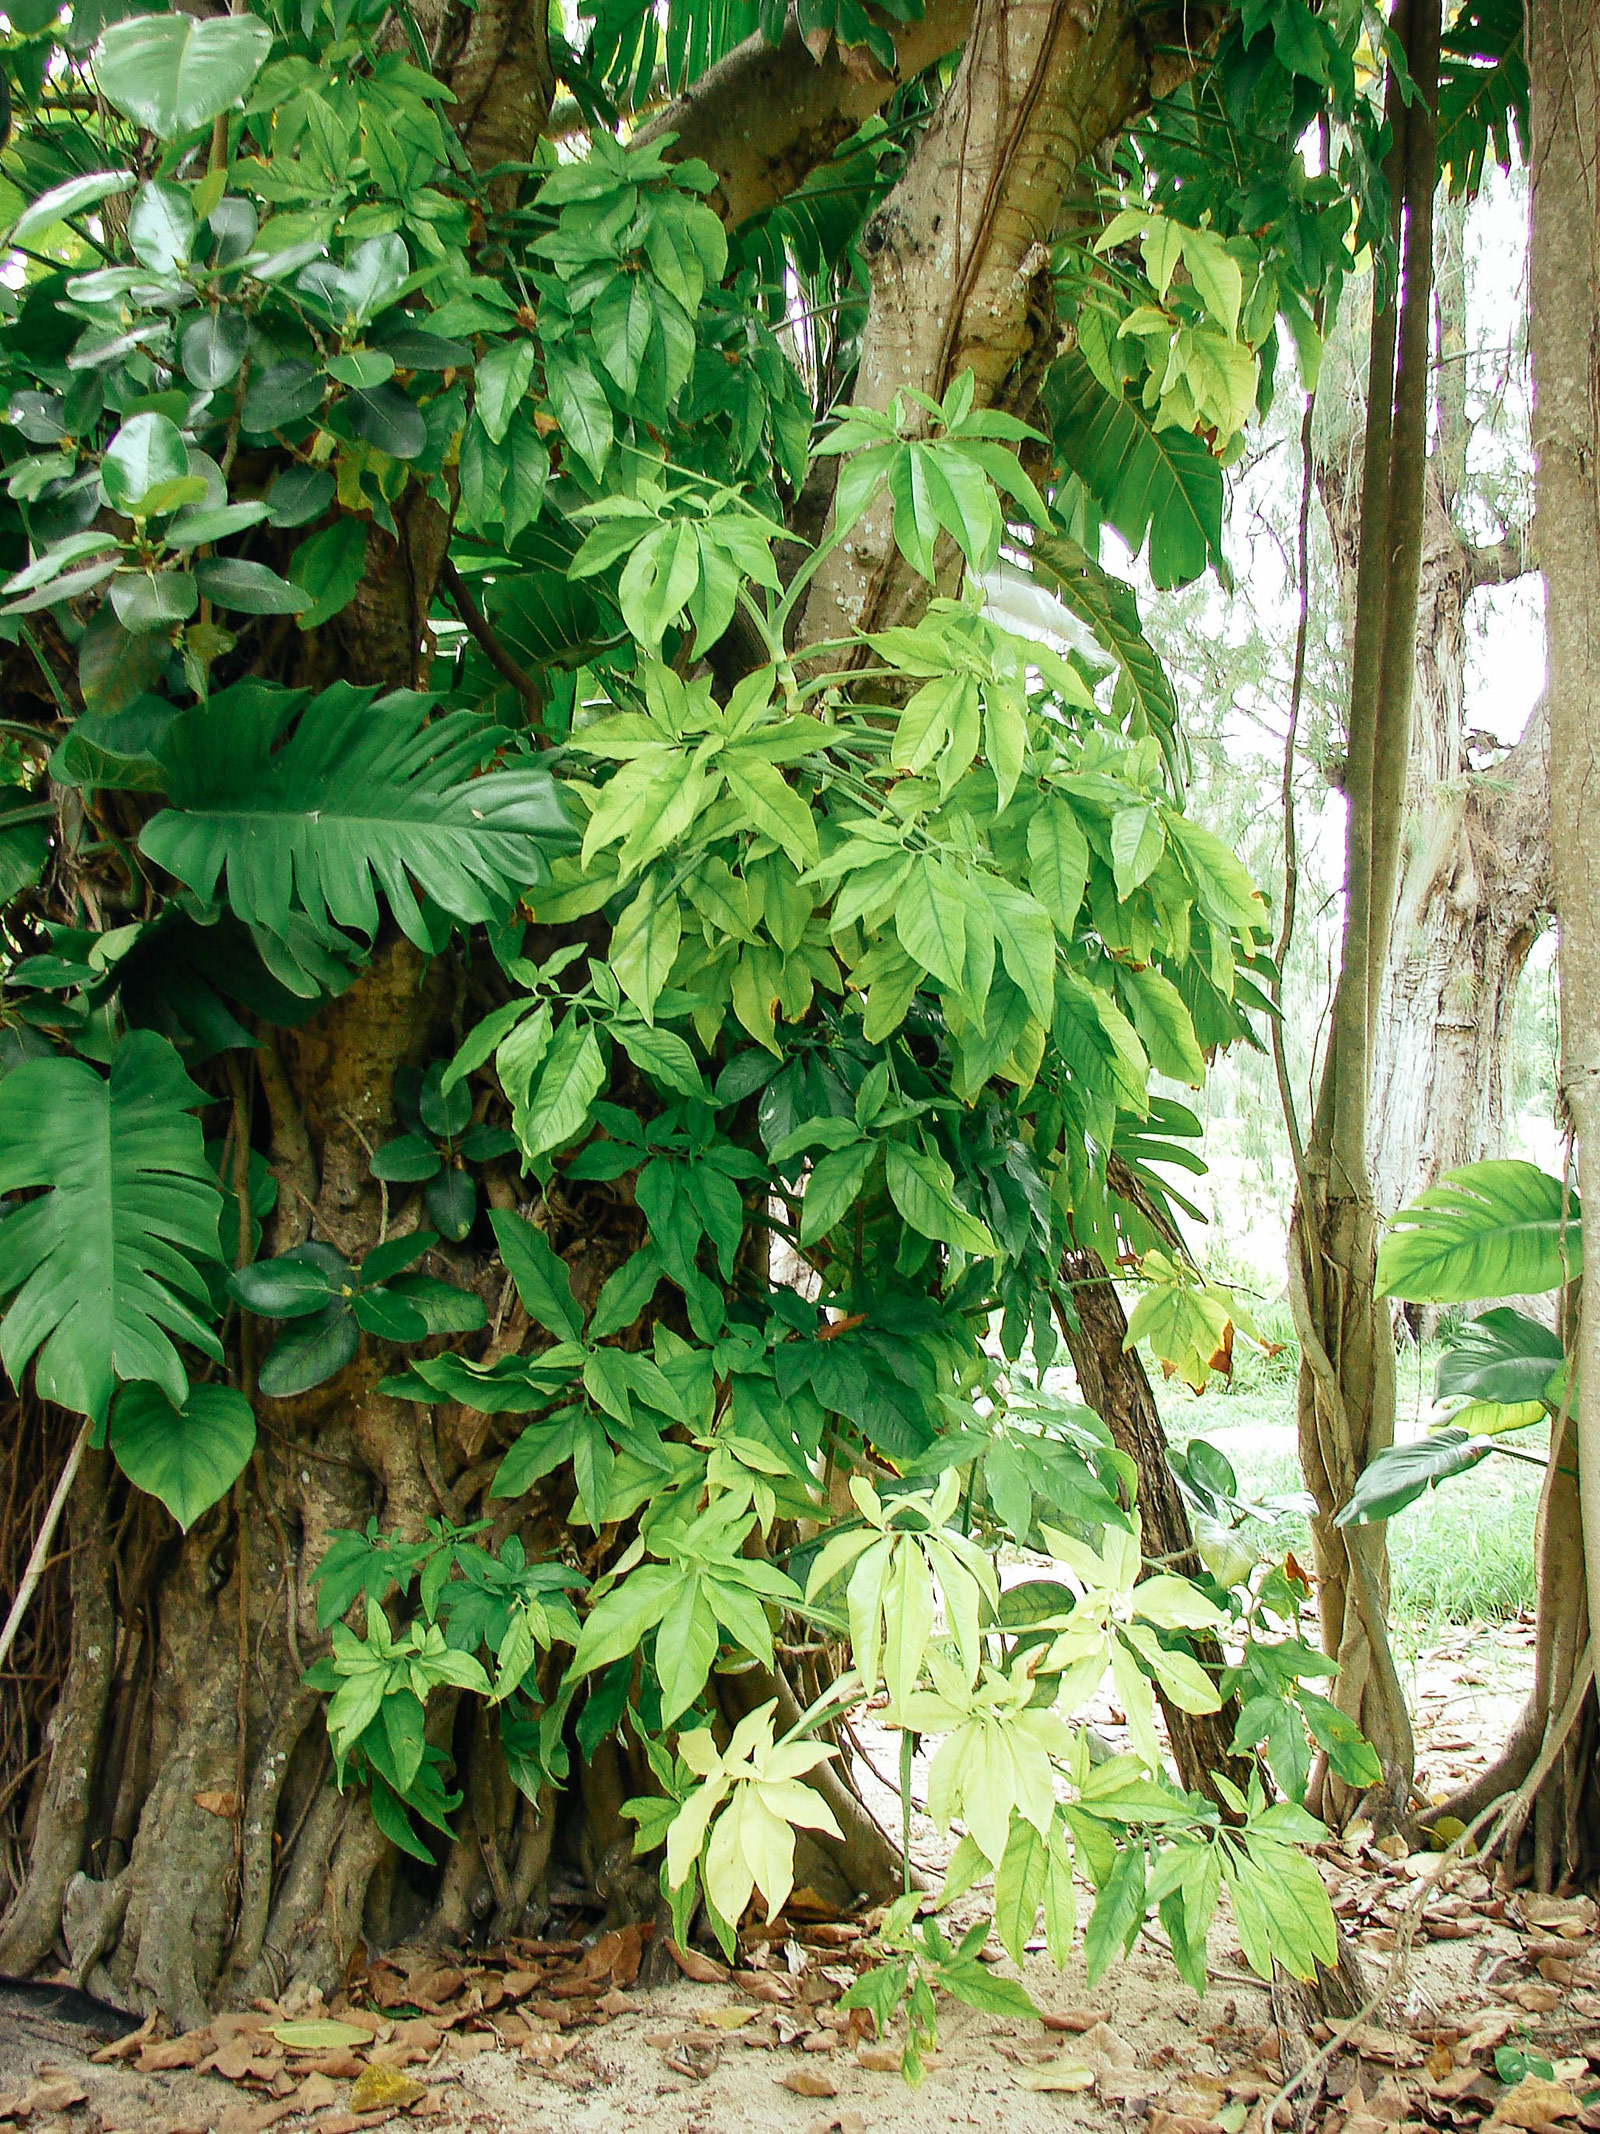 A mature Syngonium podophyllum vine climbing up a tree in the wild